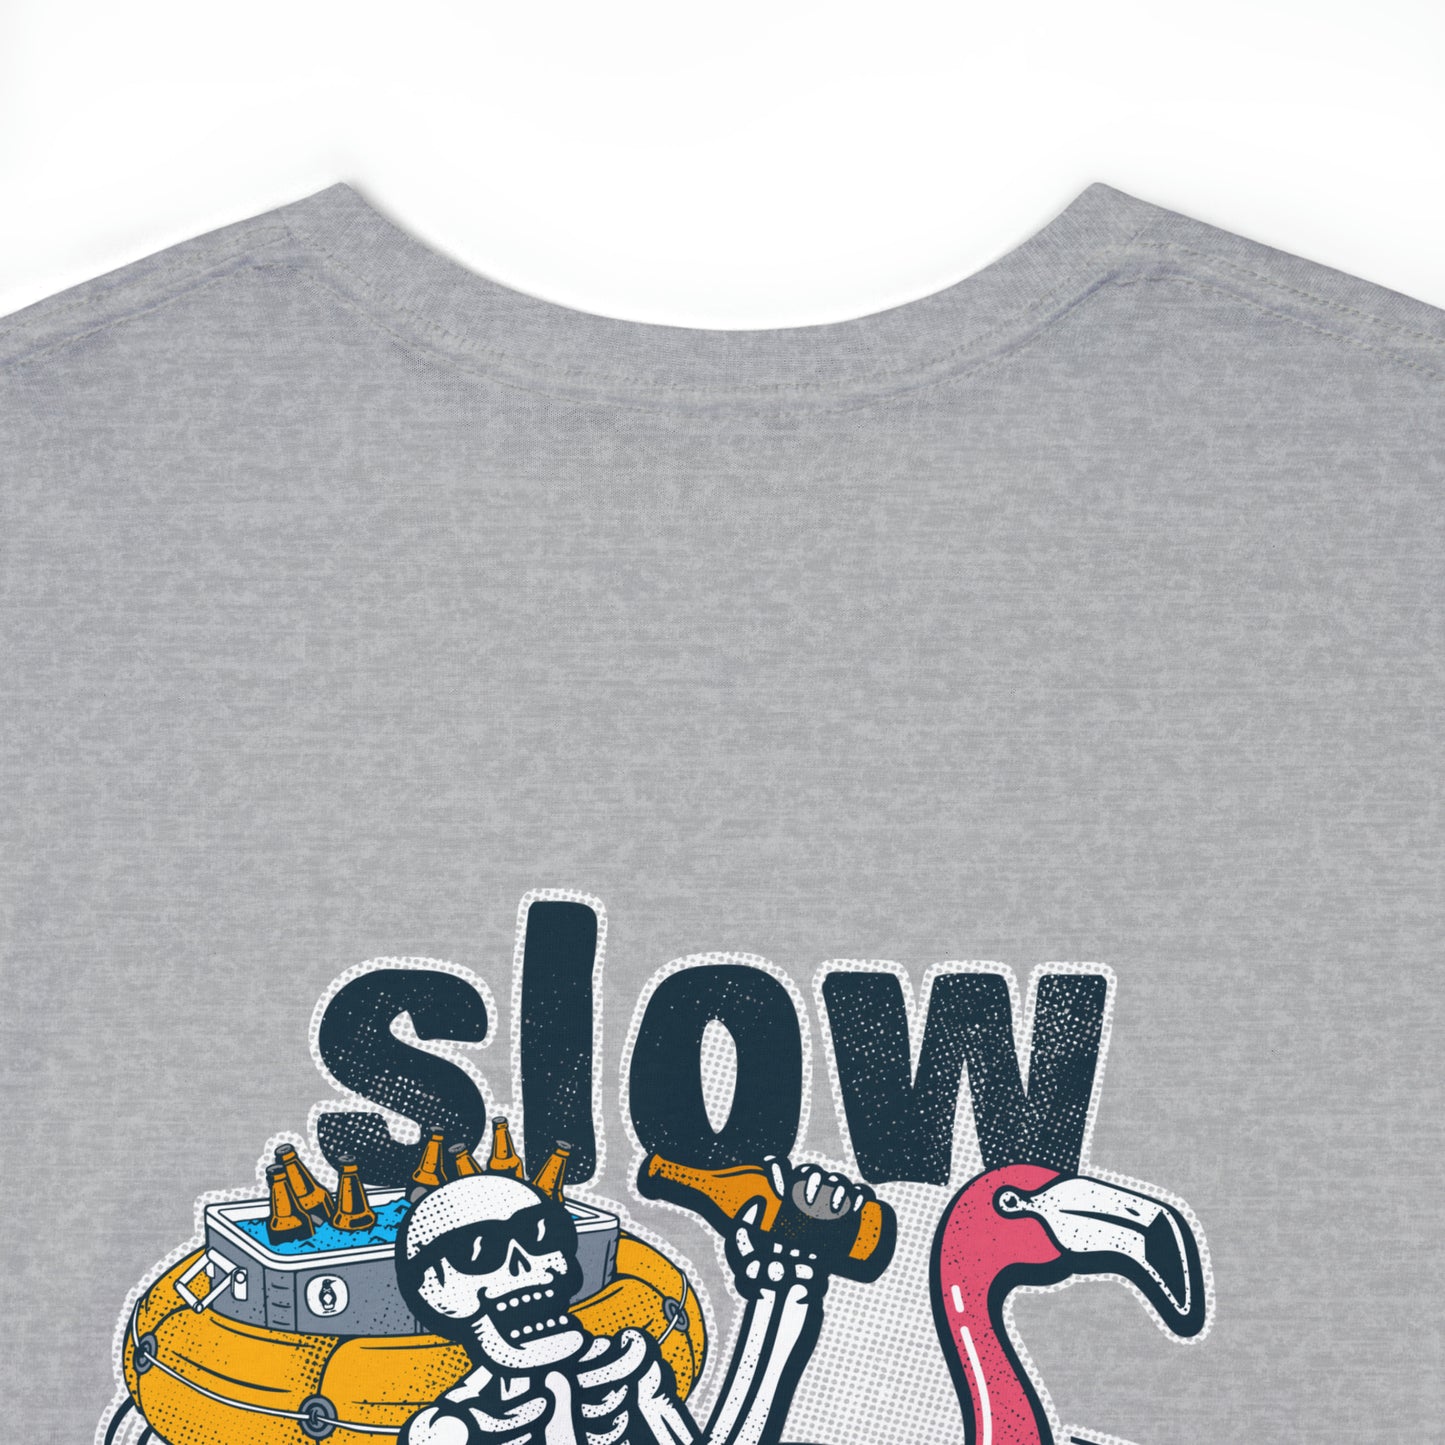 Slow Ride by Pinguin Unisex Heavy Cotton Tee